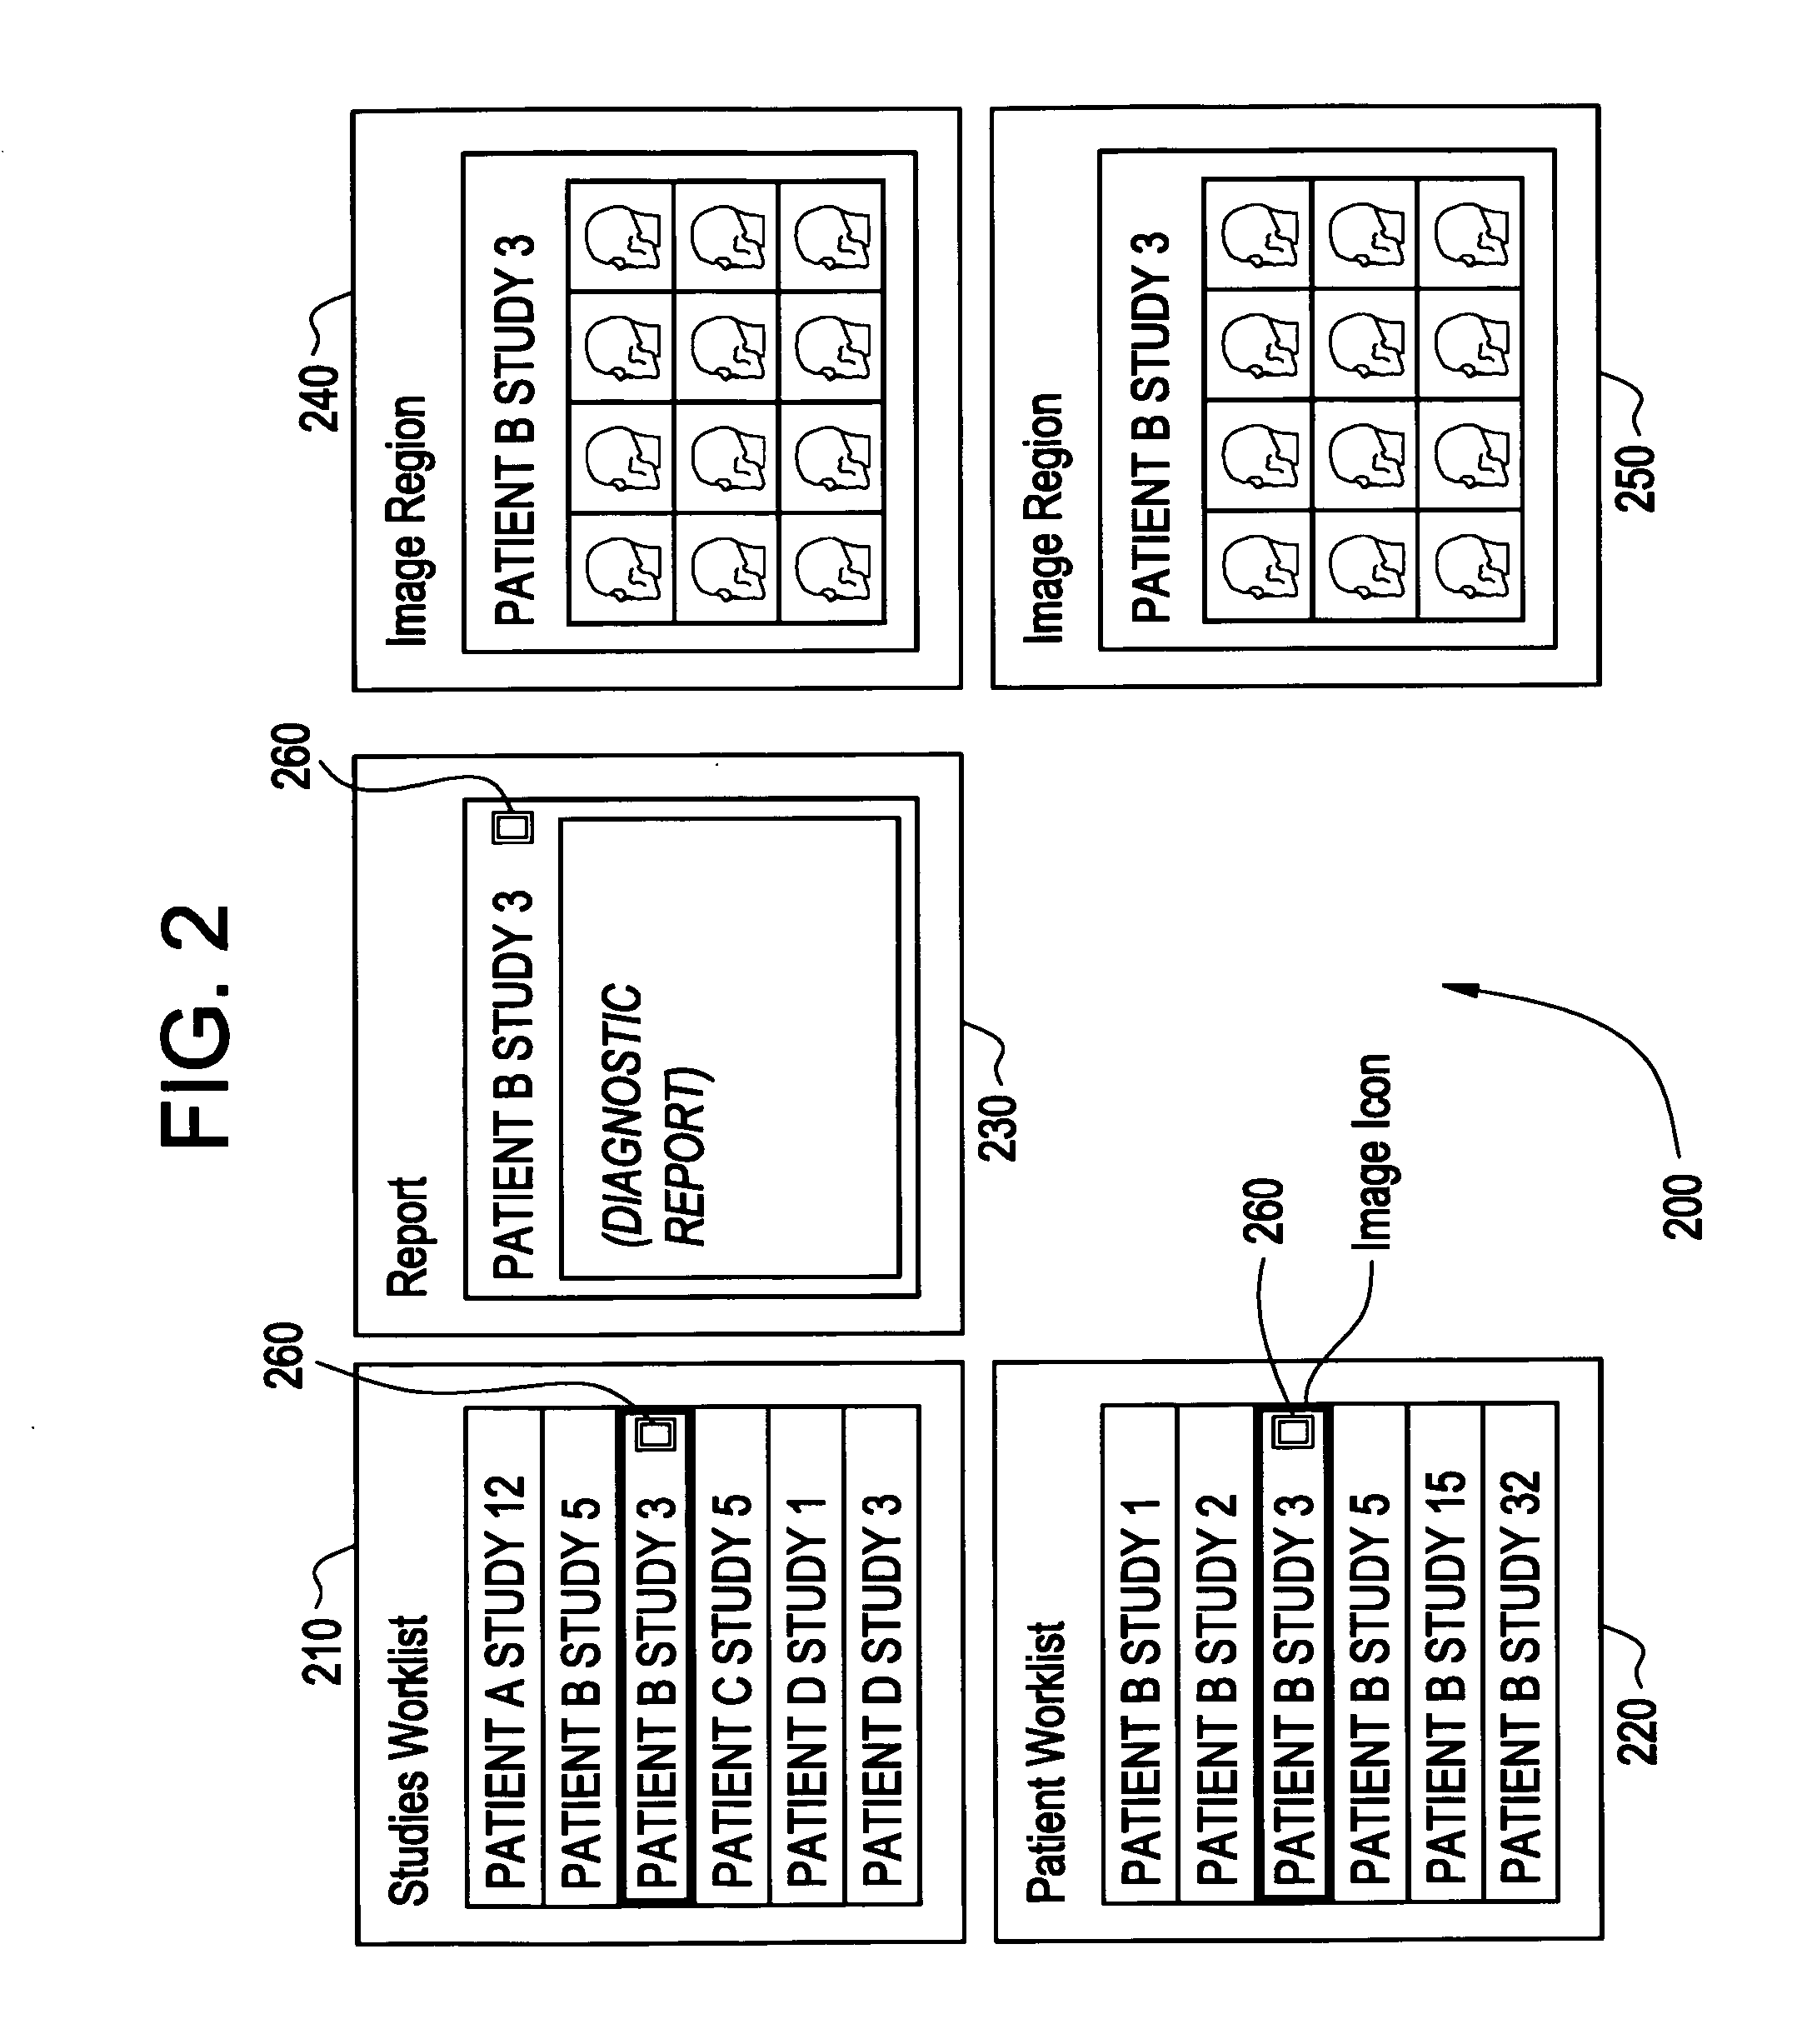 Method and apparatus for managing multi-patient contexts on a picture archiving and communication system